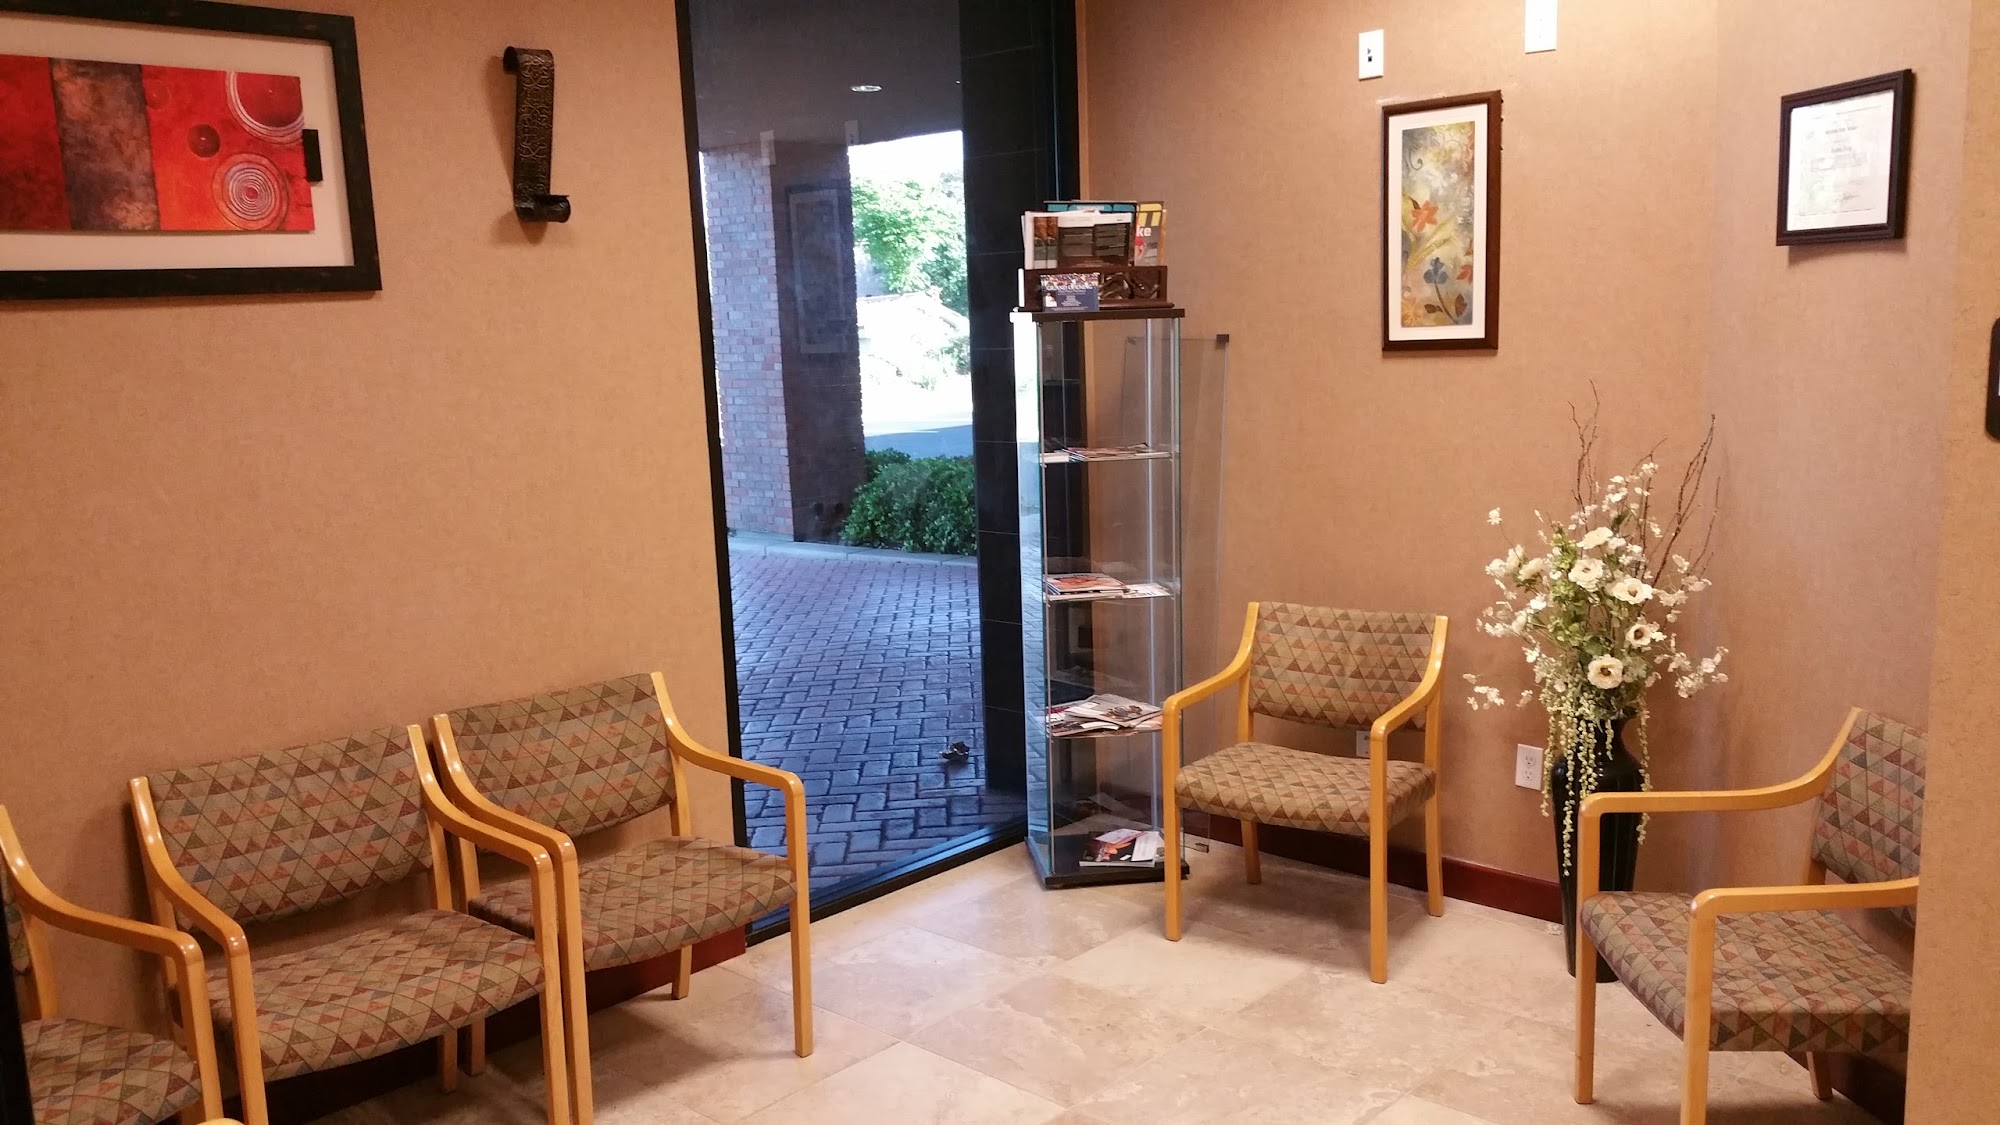 Chino Valley Acupuncture Wellness